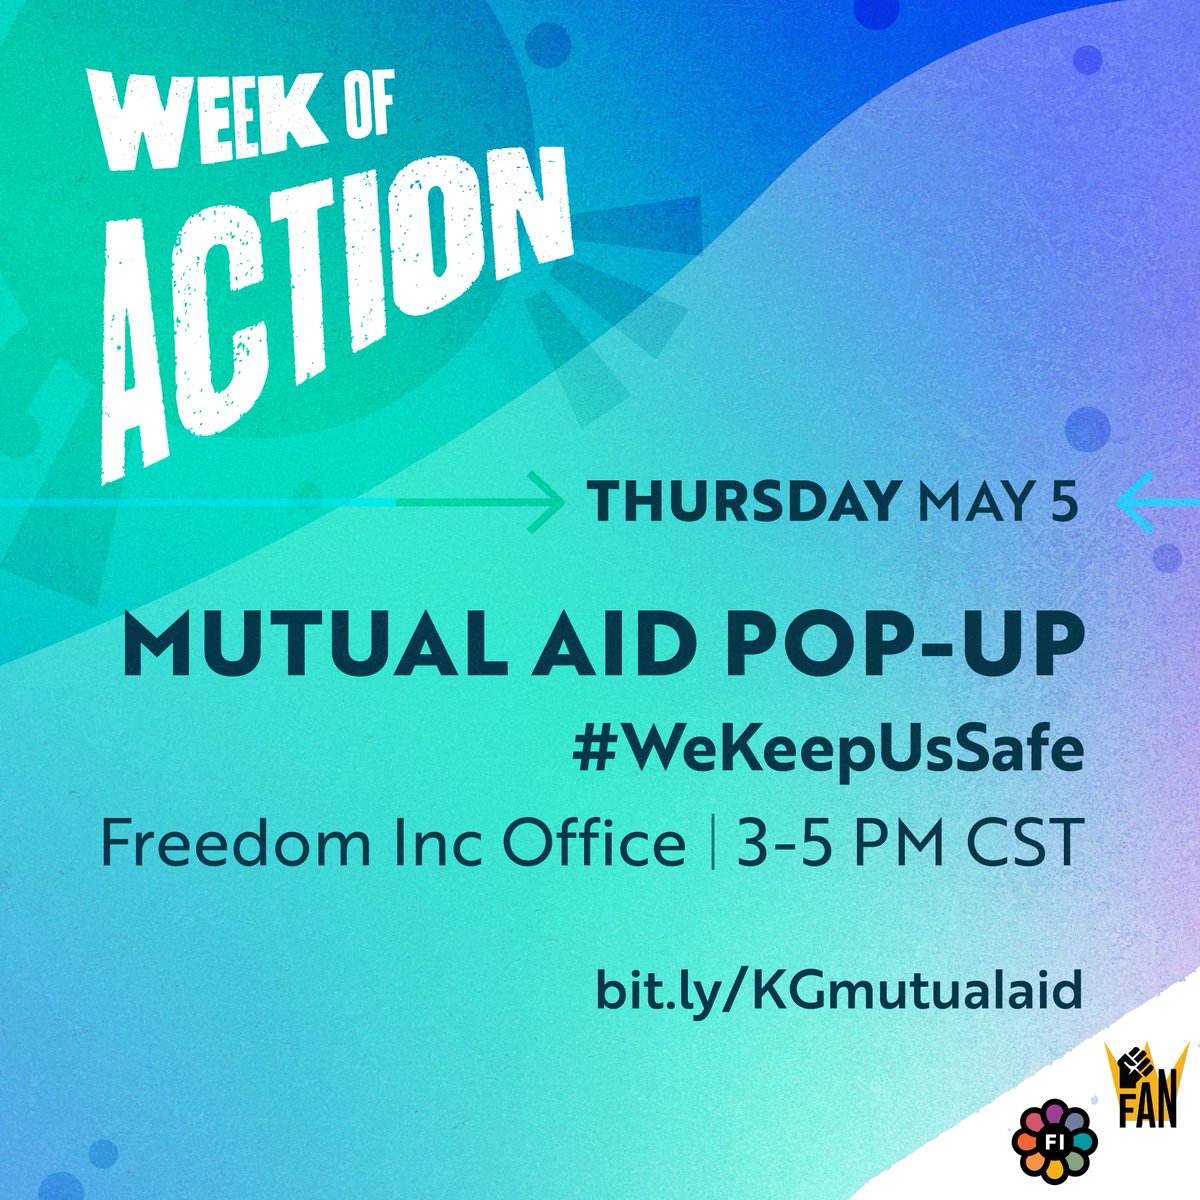 There's still a chance to show up for our Week of Action to #DefendBlackWomen TOMORROW for @FreedomInc's mutual aid pop-up at Penn Park! Join us from 3-5pm for some mutual aid self defense kits! Let us know you're coming so we bring enough kits: bit.ly/KGmutualaid